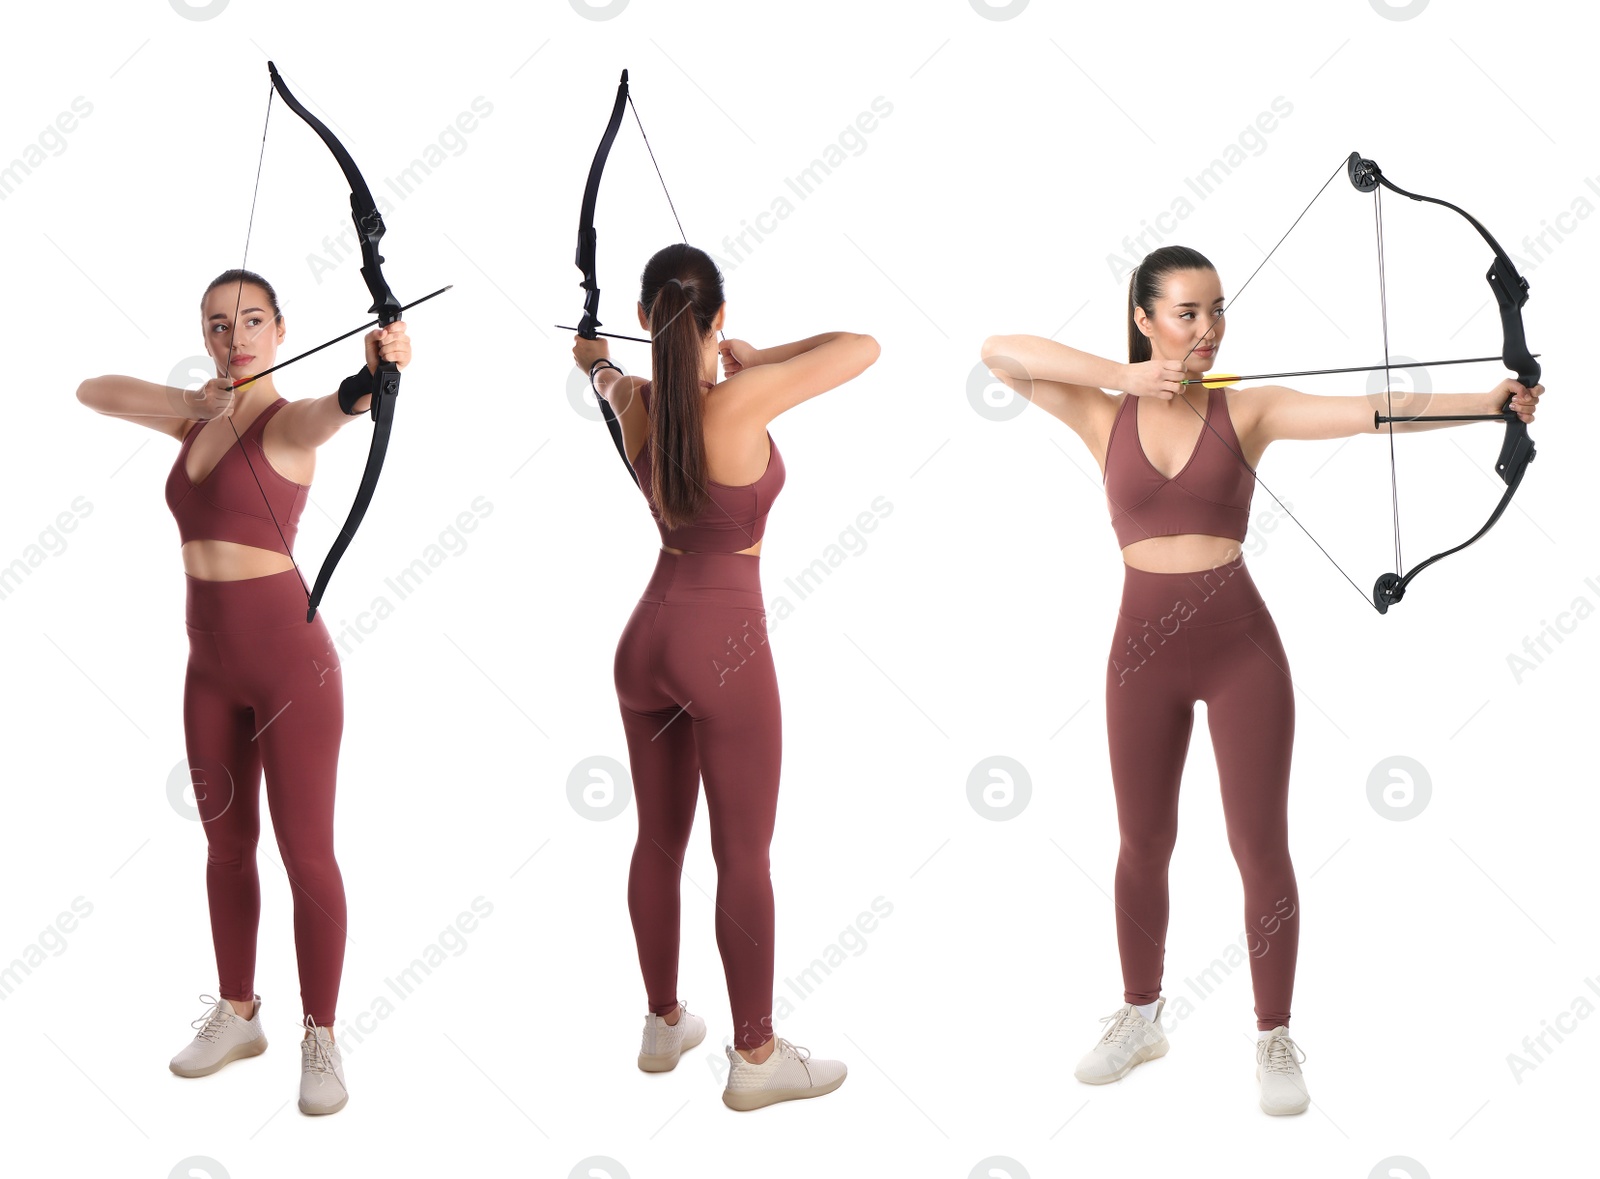 Image of Young woman practicing archery on white background, collage